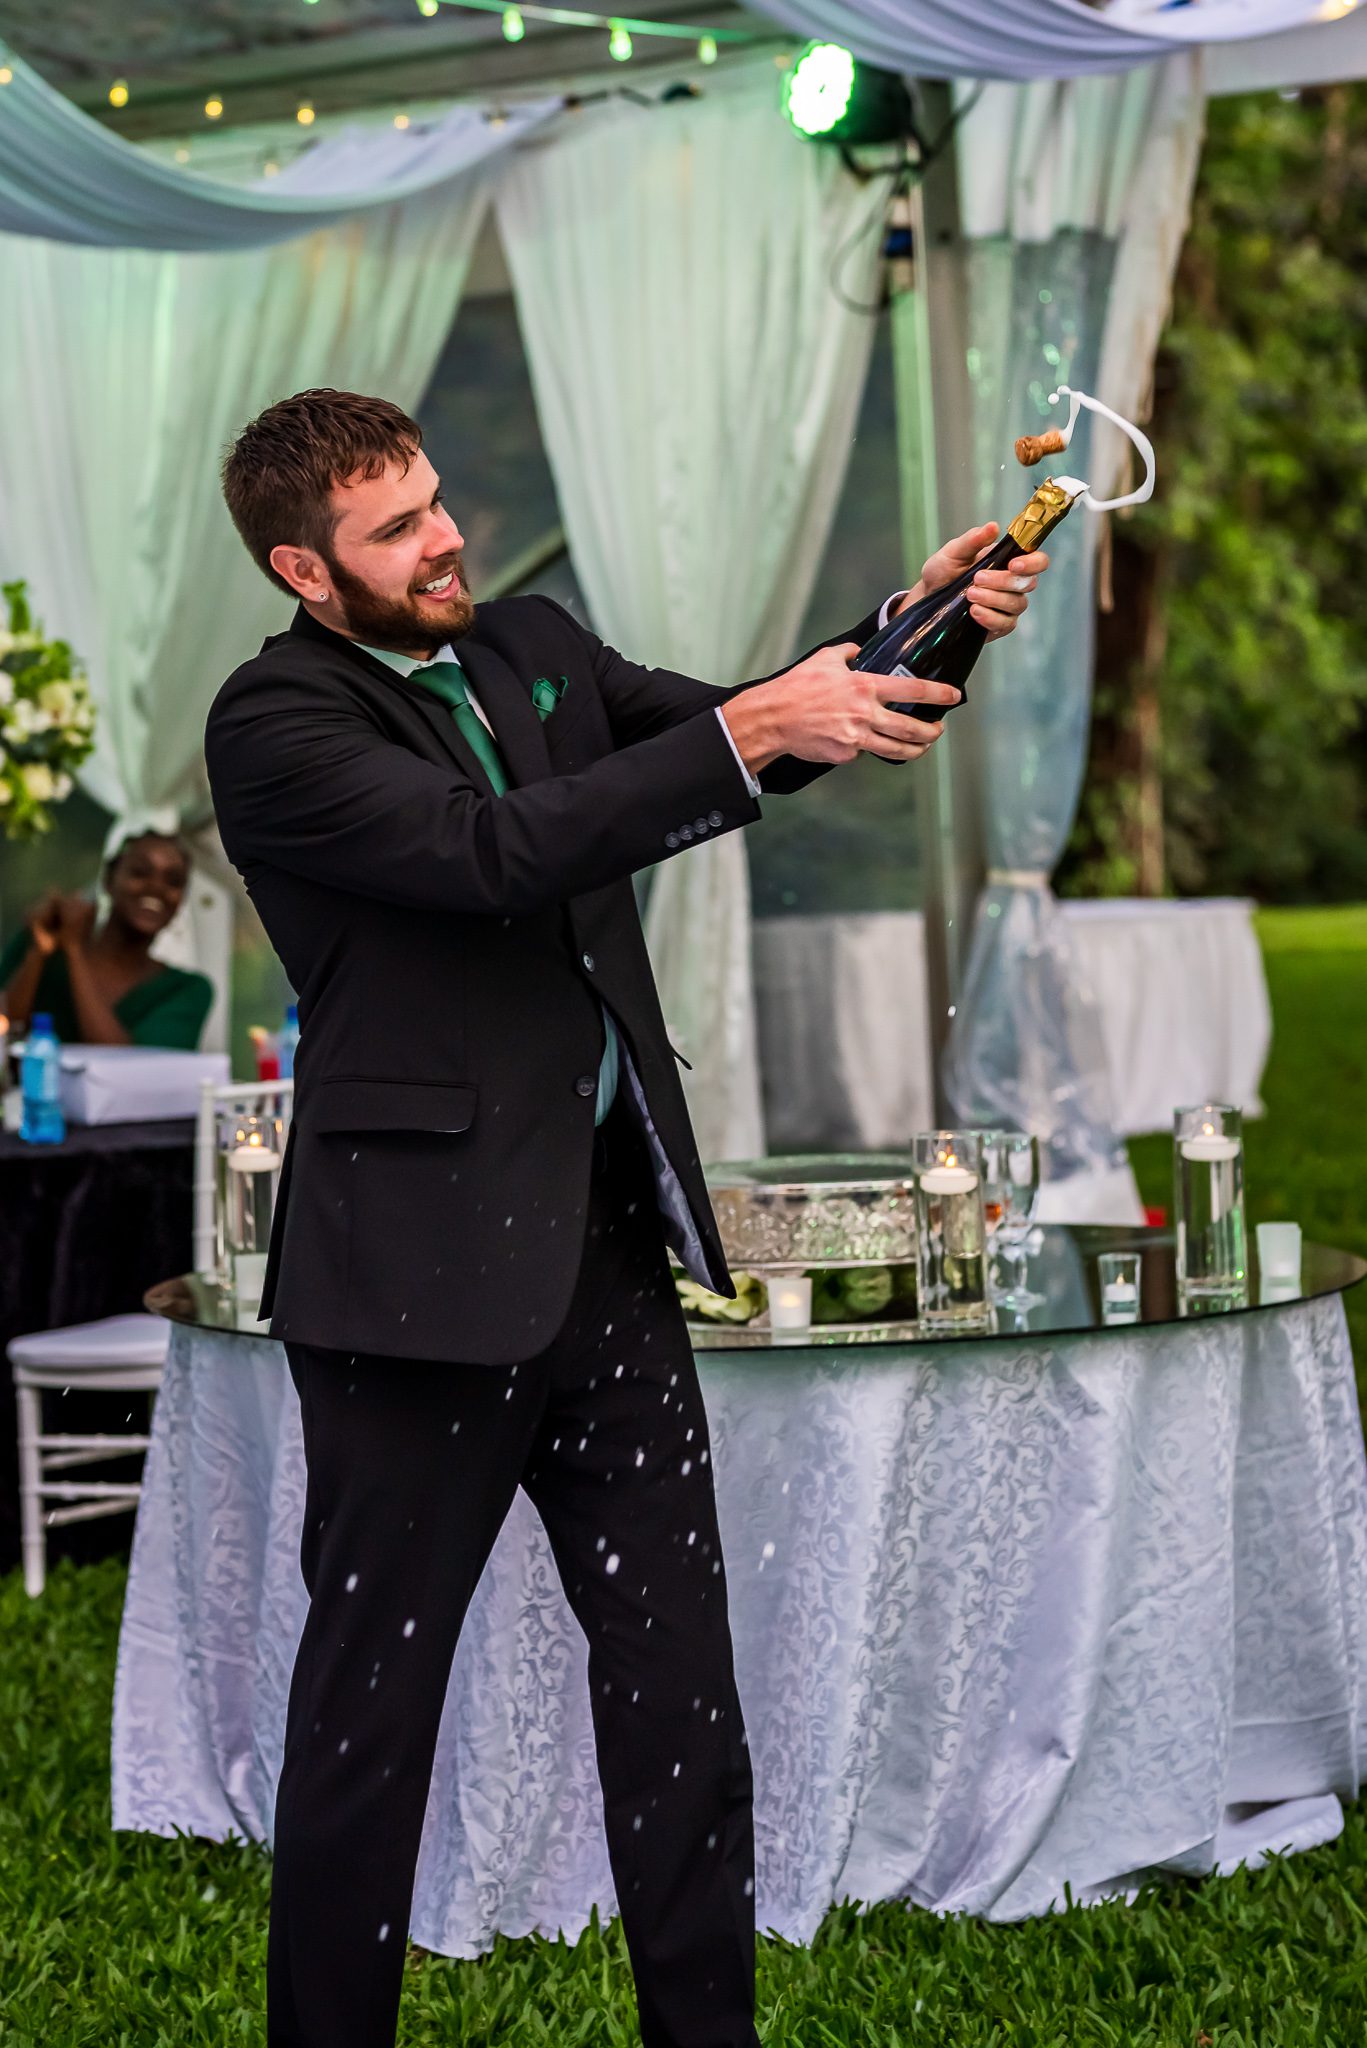 a man pops a champagne bottle at a wedding reception